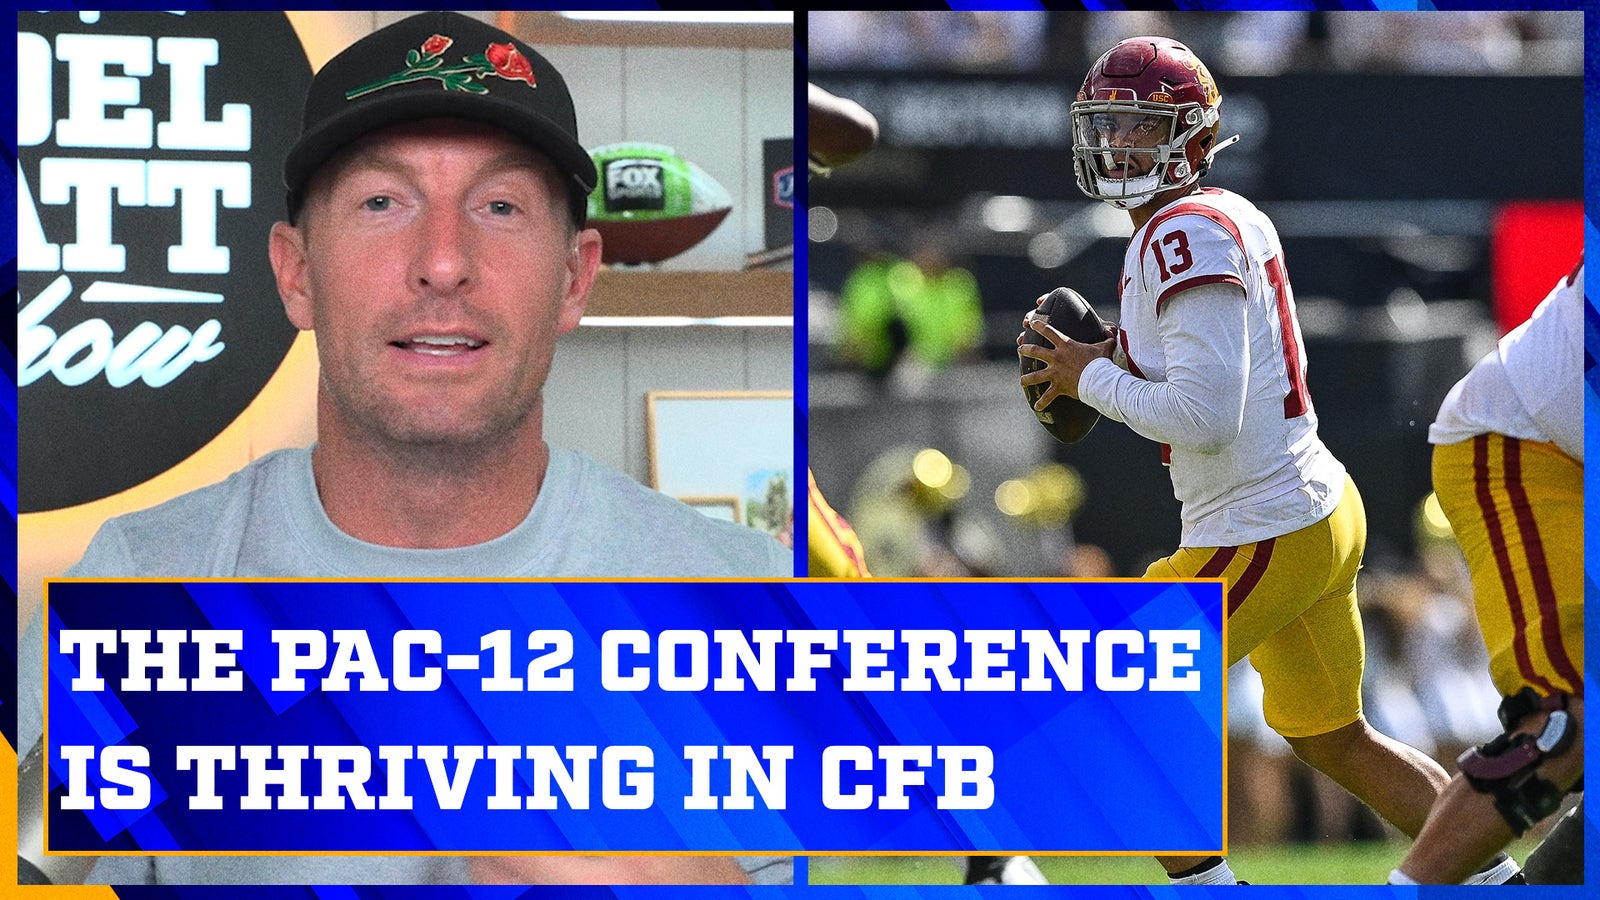 The Pac-12 is flourishing in college football